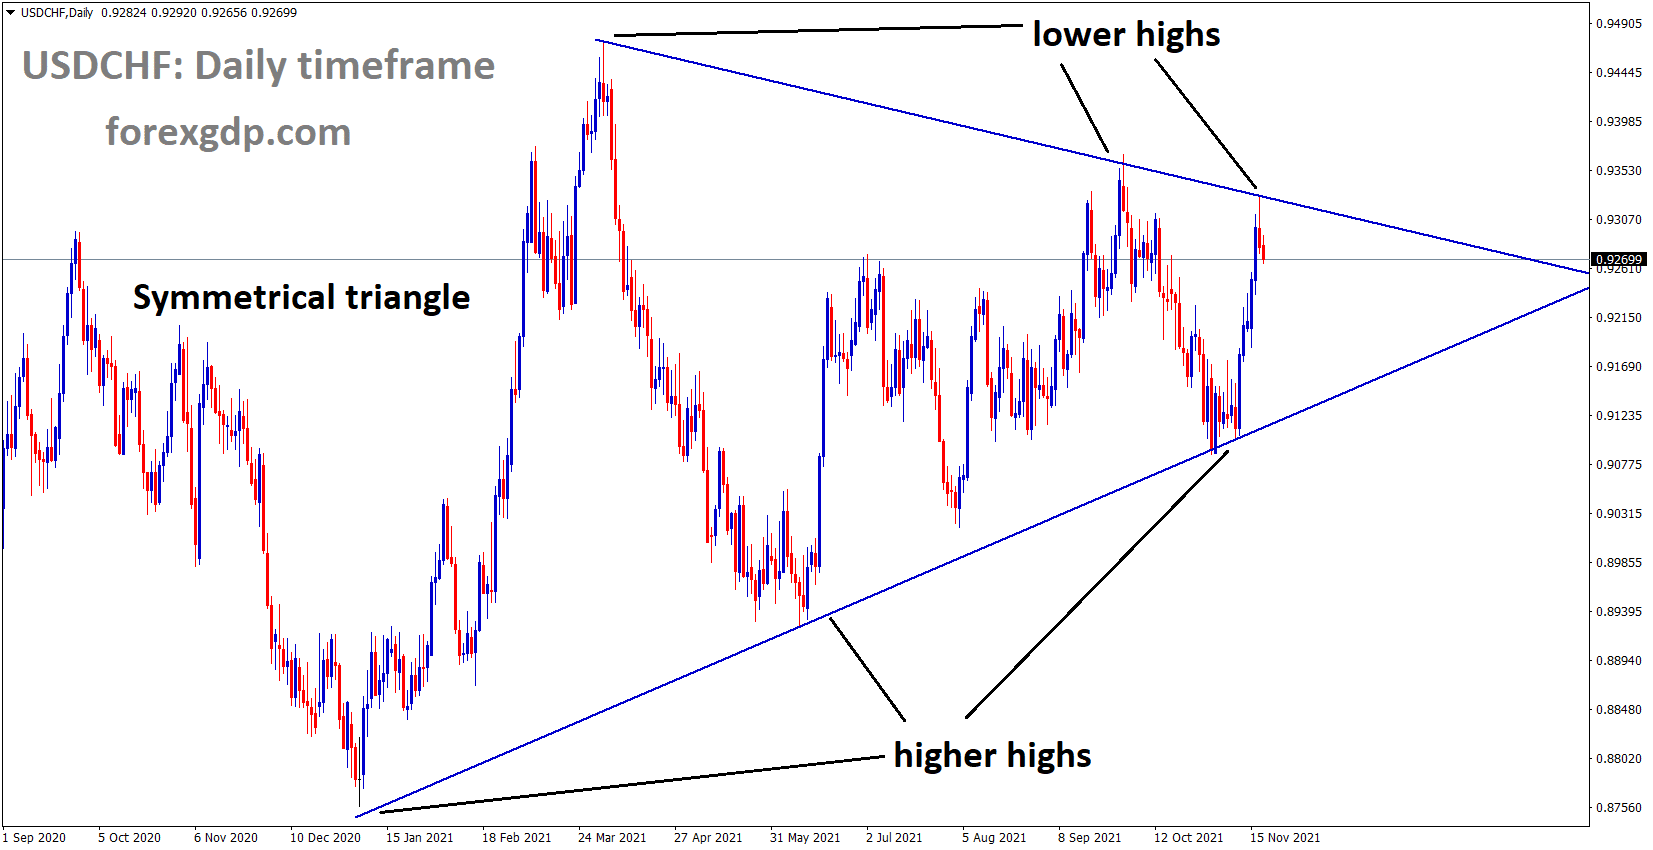 USDCHF is moving in the Symmetrical triangle pattern and the market fell from the top of the triangle pattern